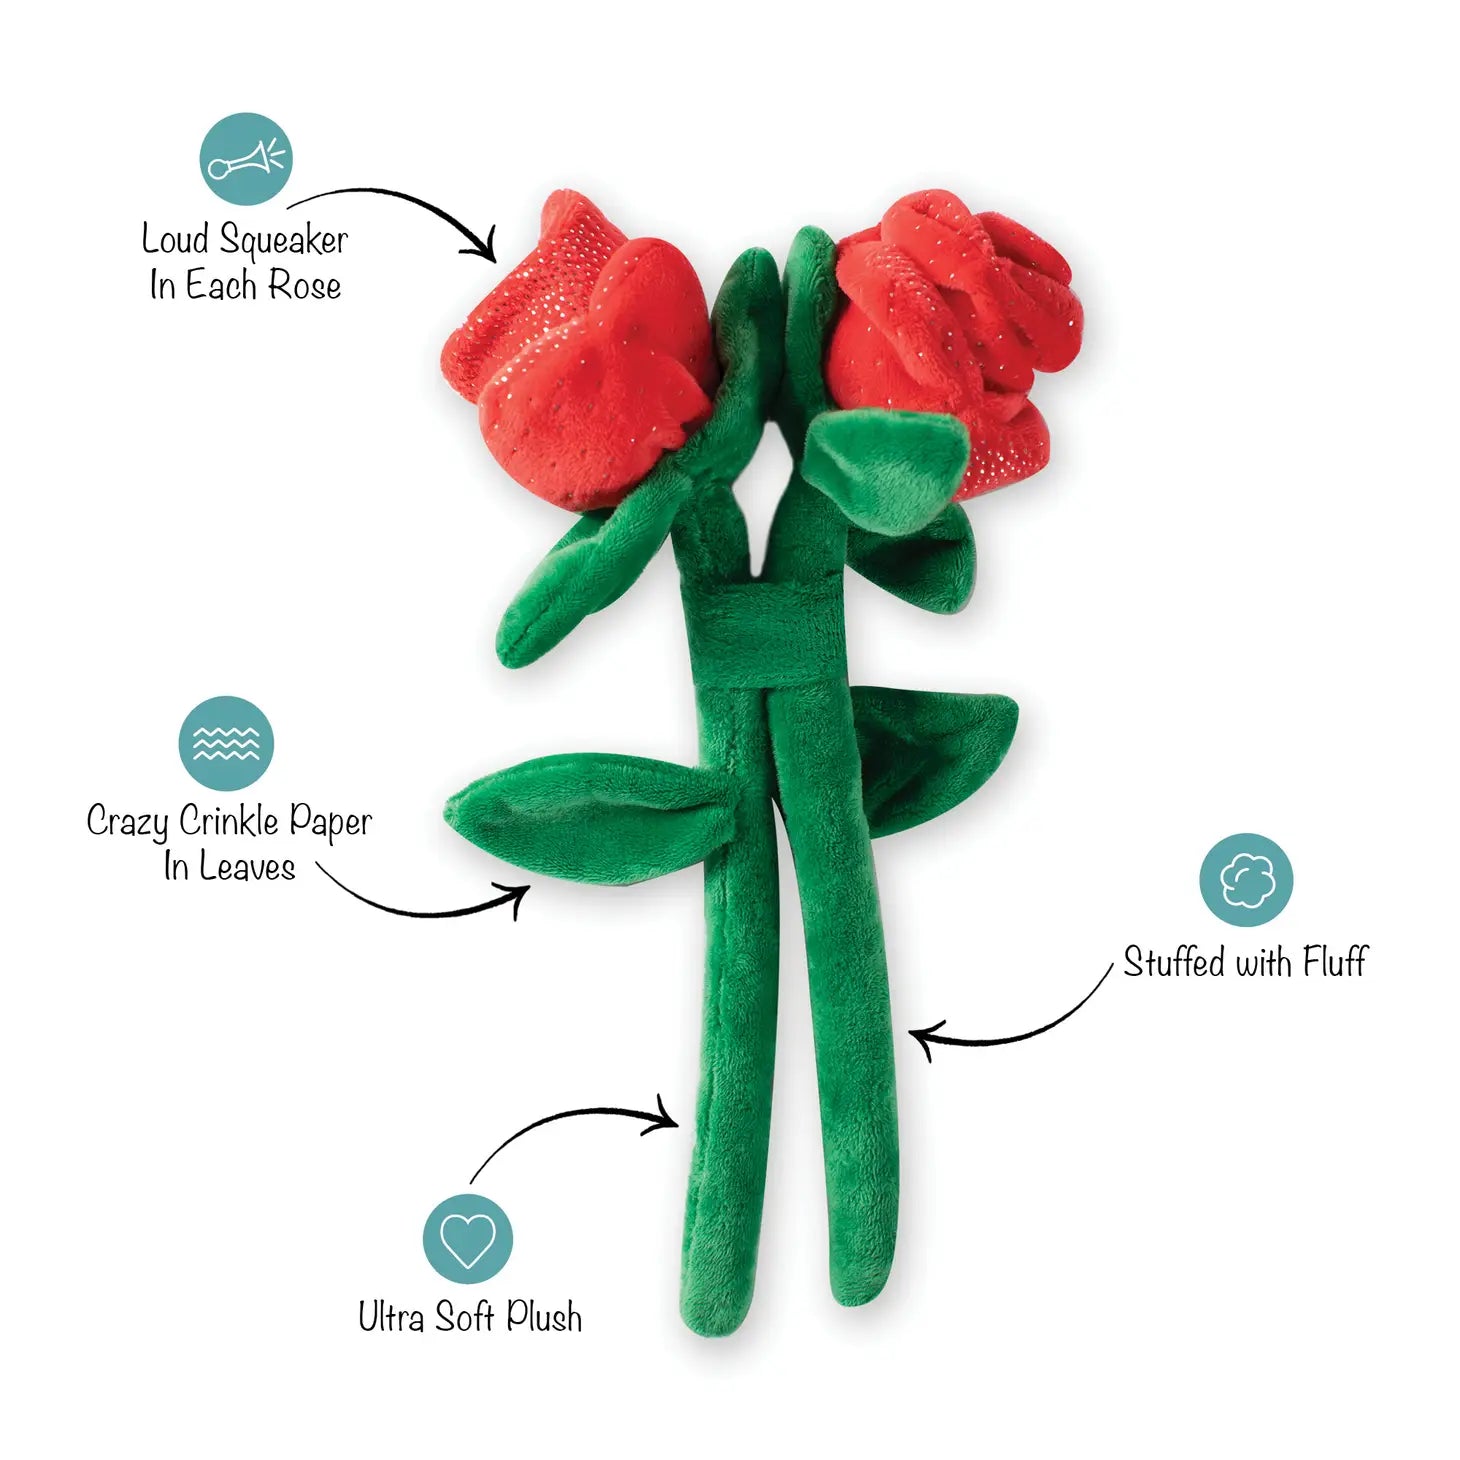 Petshop by Fringe Studio - Will You Accept This Rose? Dog Toy 2 Roses Set